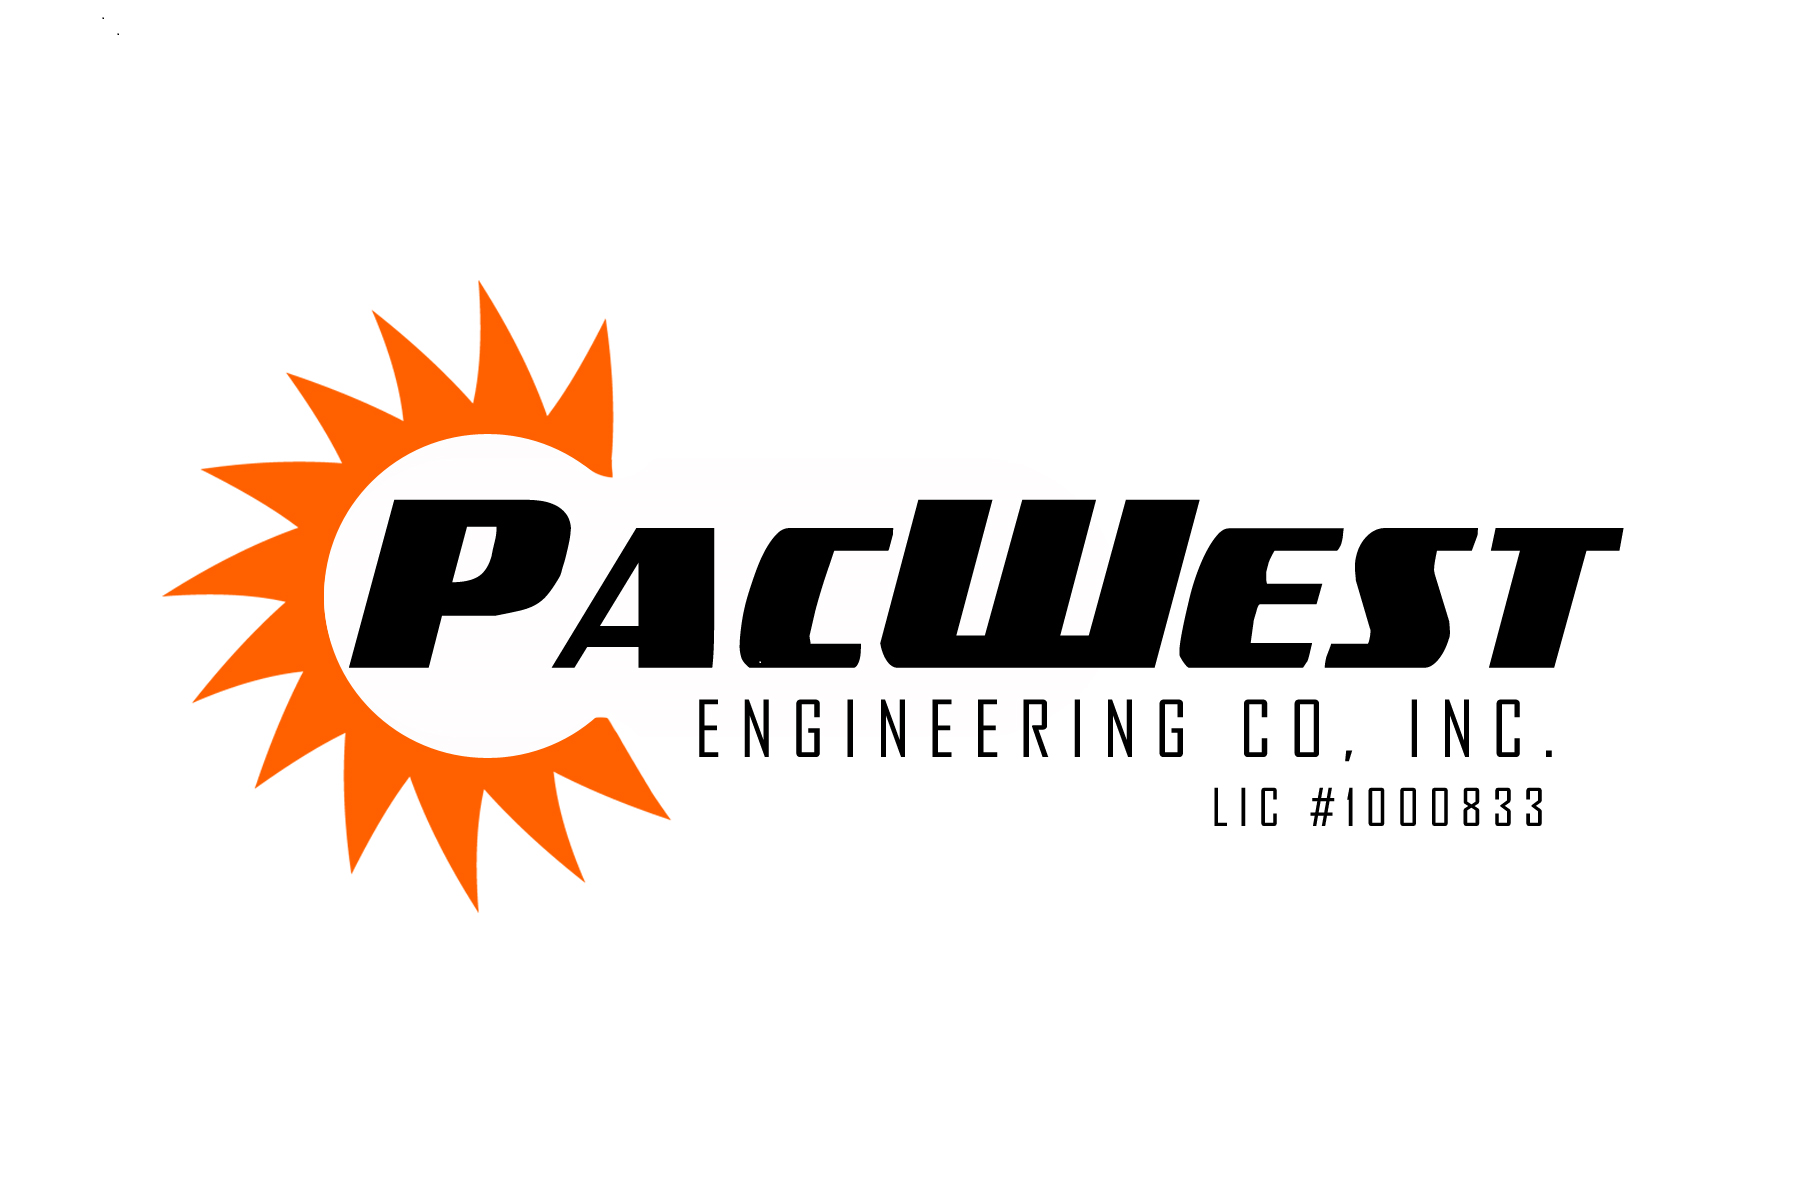 PacWest Engineering Co, Inc. Logo